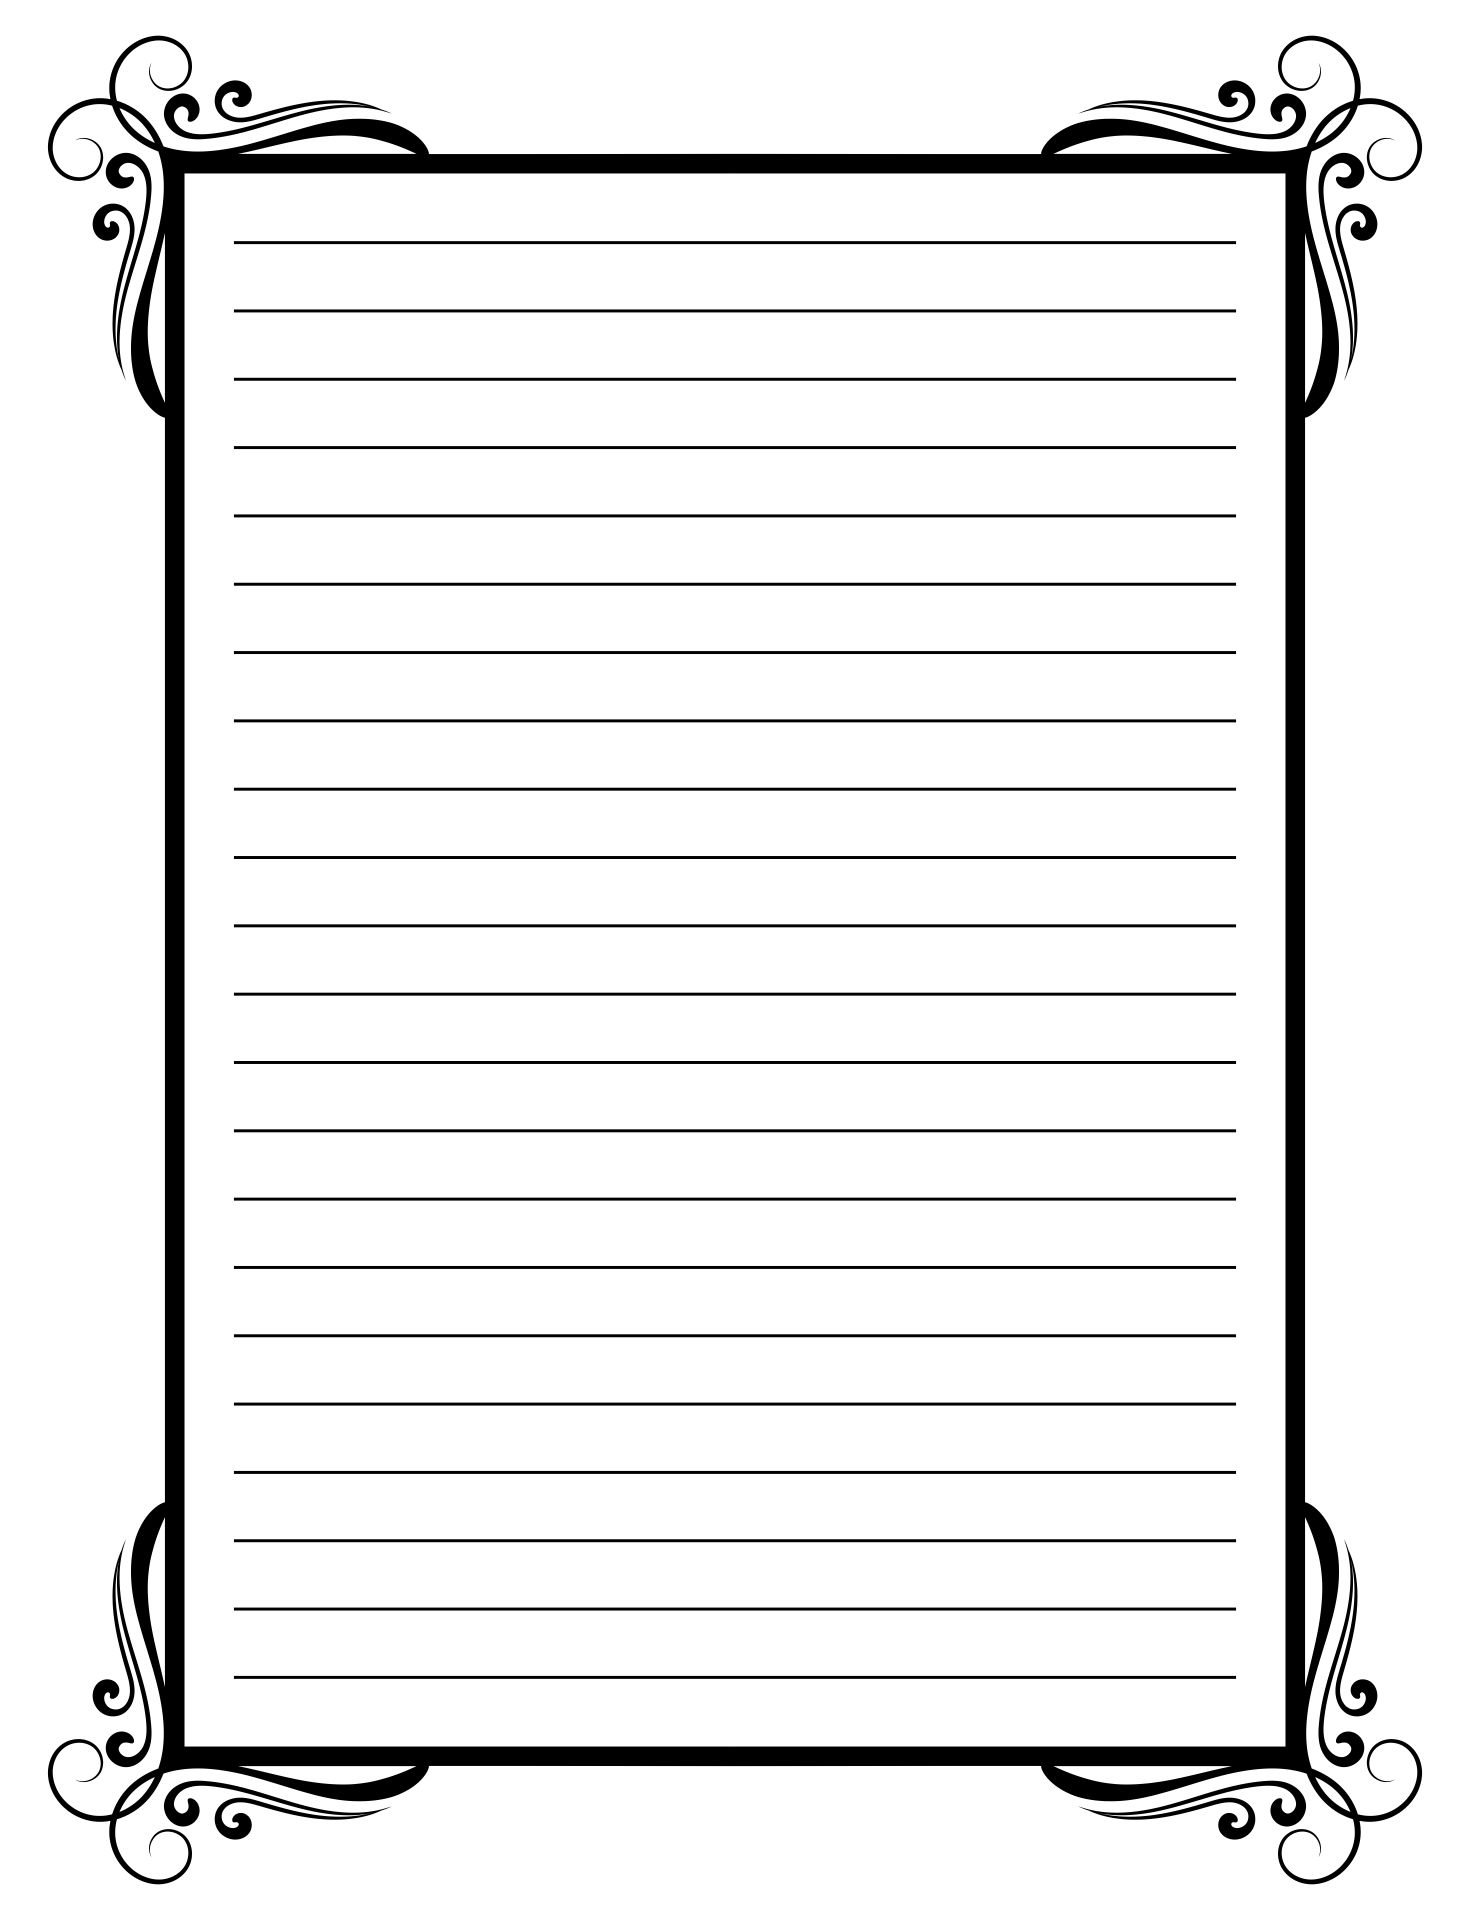 8 Best Images of Printable Lined Stationery Printable Lined Writing